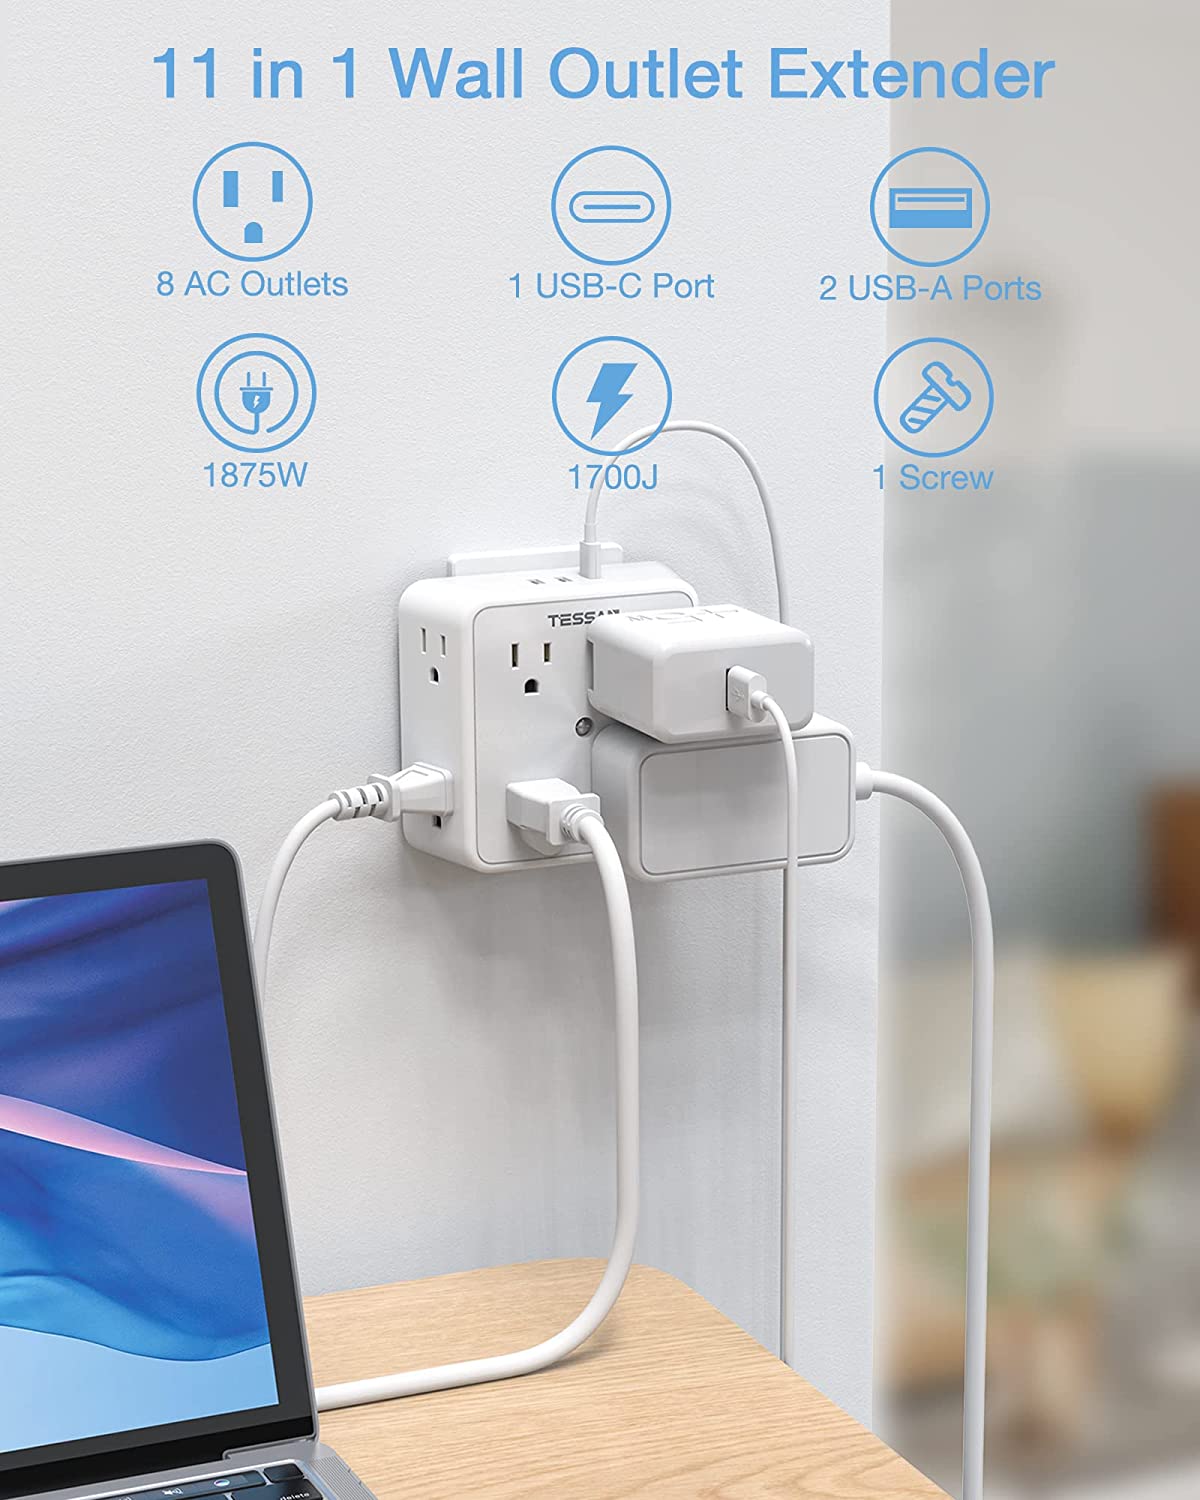 TESSAN Surge Protector Outlet Extender, 8 Multi Outlet Splitter with 3 USB Wall Charger (1 USB C Port)